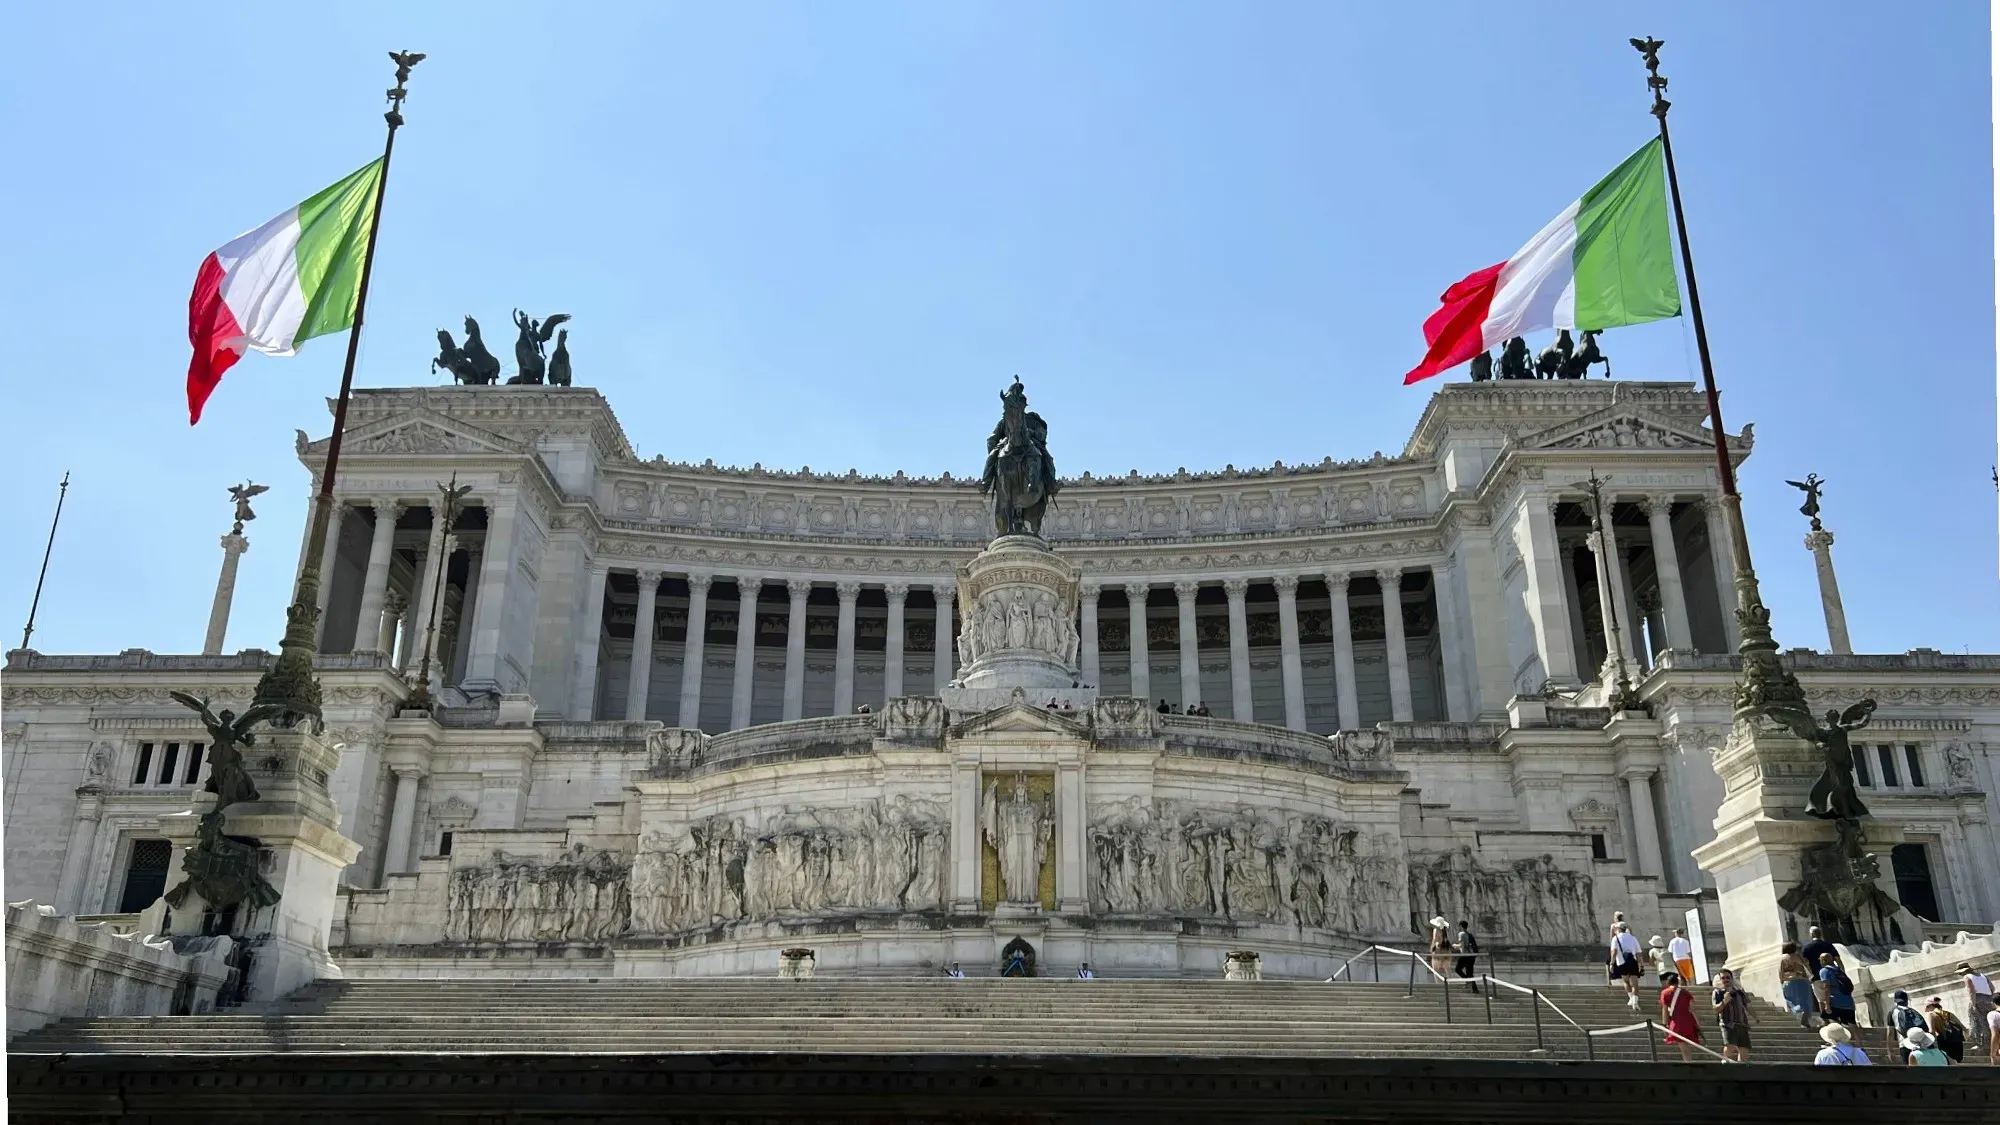 Altar of the Fatherland. Front shot with waving Italian flags.